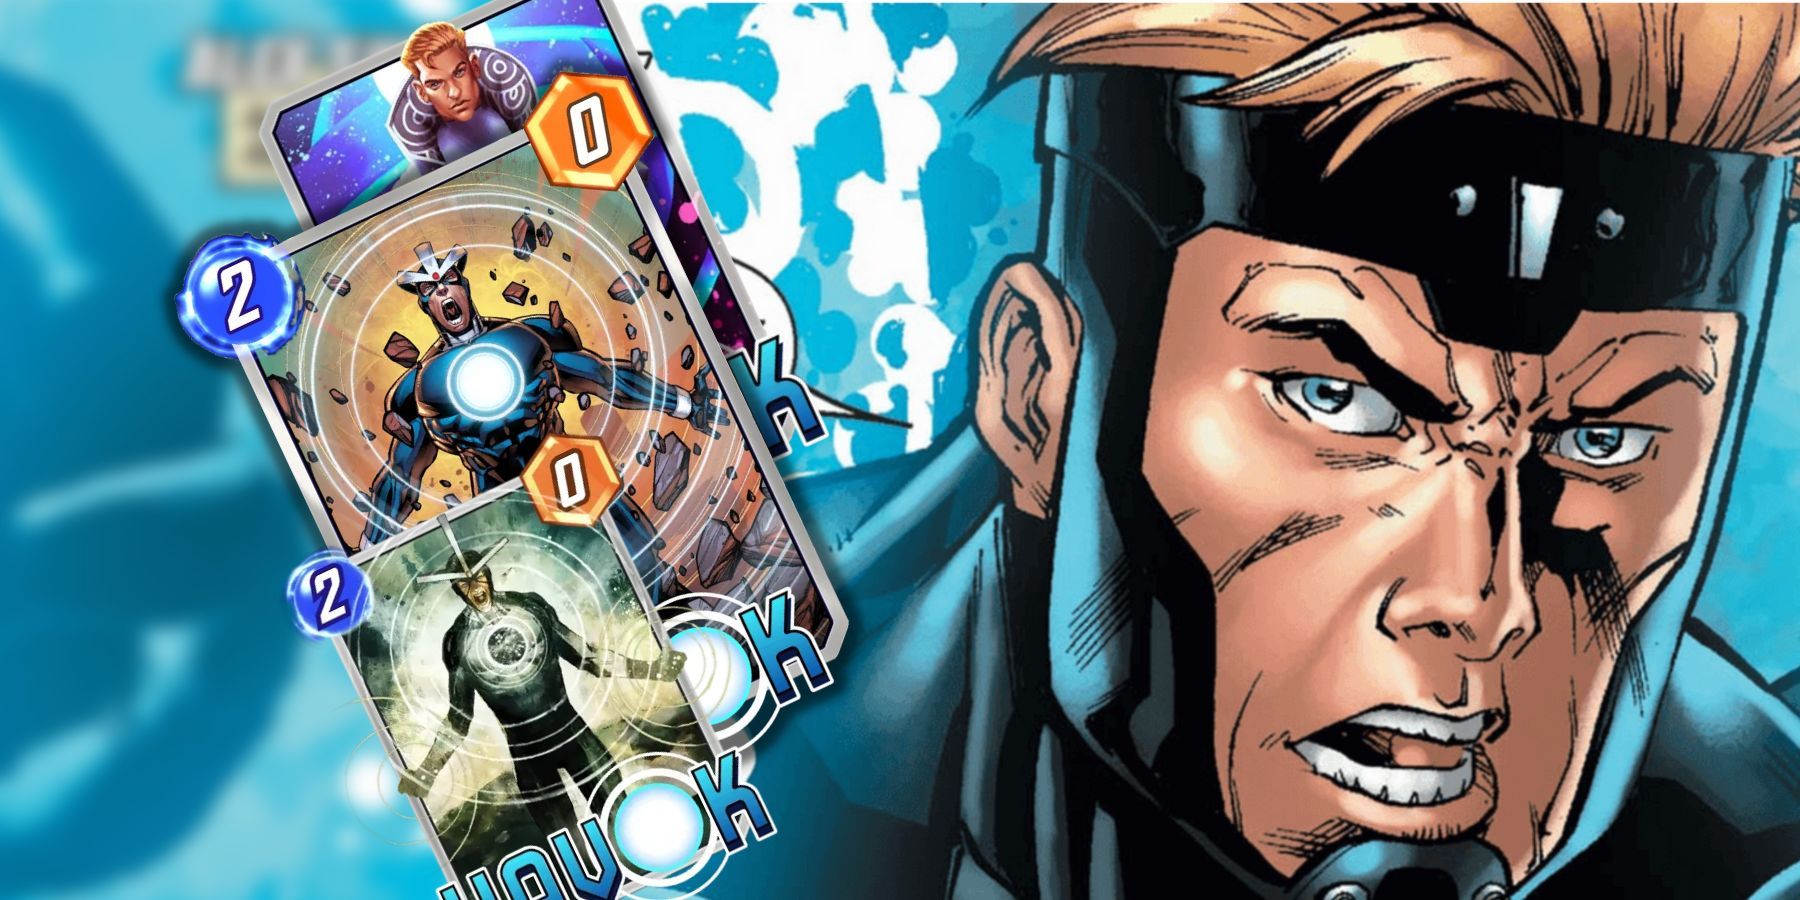 a batch of havok cards in marvel snap next to havok's image in marvel comics.